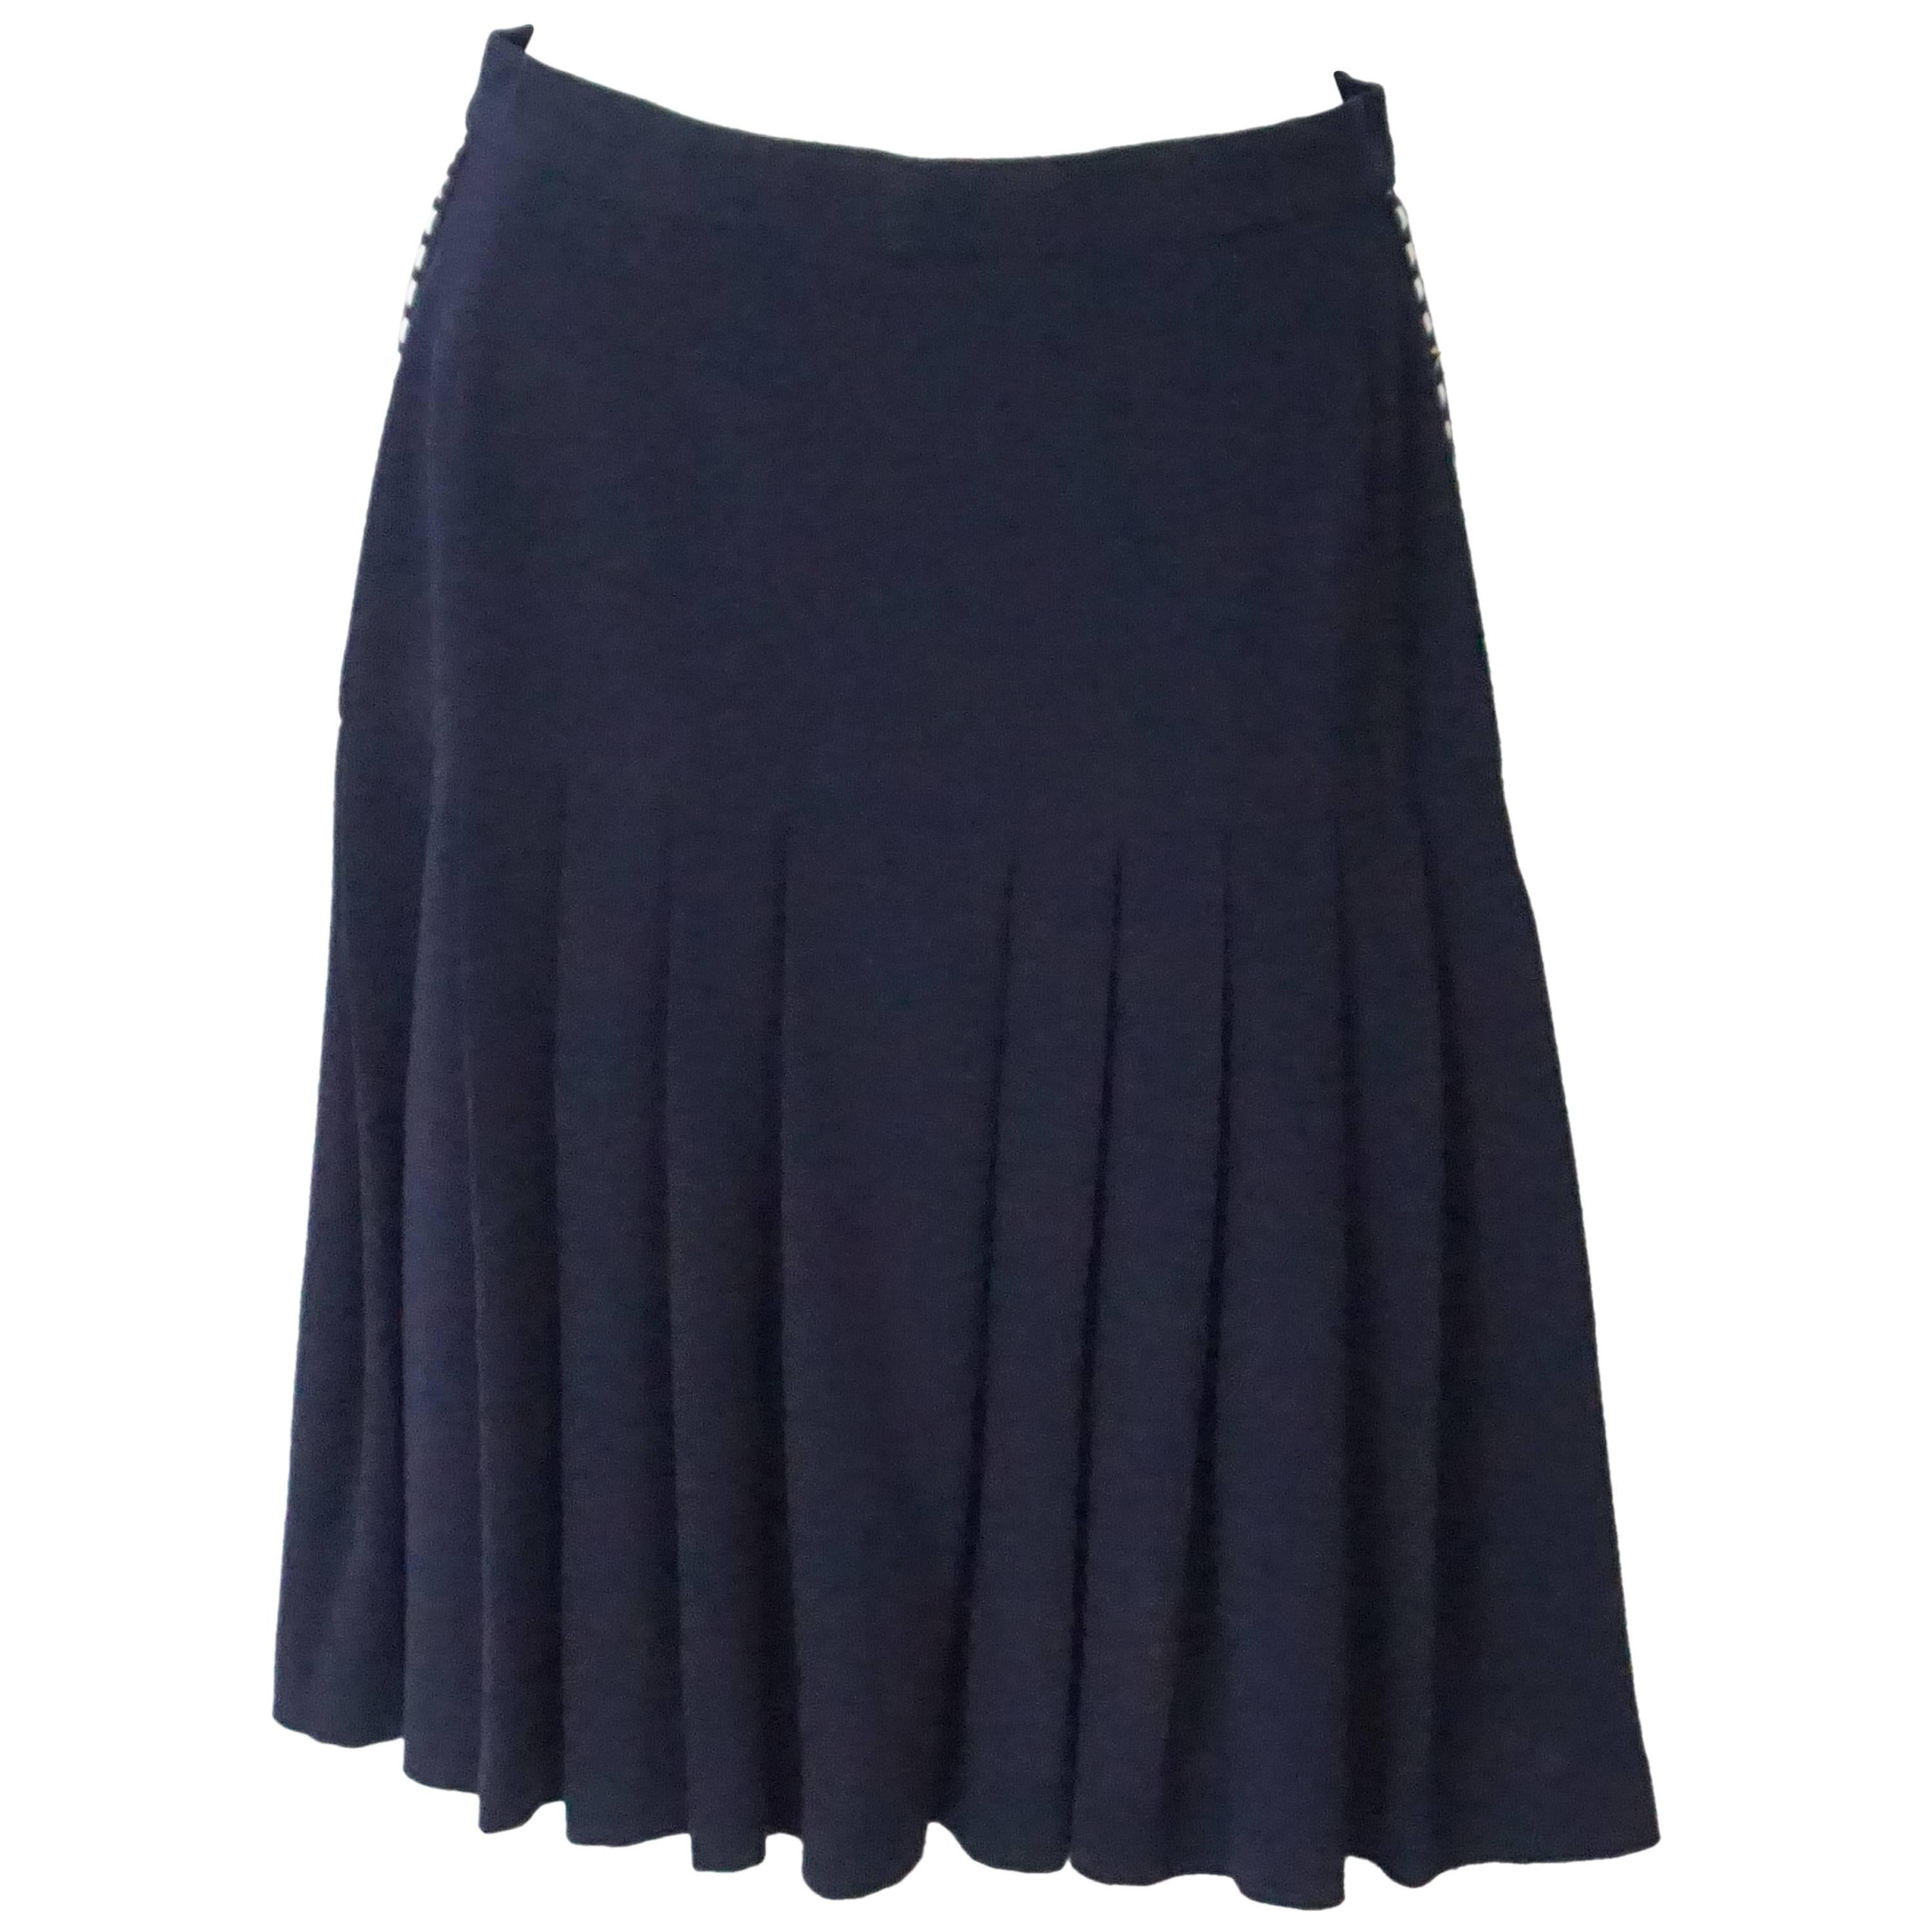 Chanel Navy Wool Pleated Skirt w/ white patent detail - 40 - Circa 80's